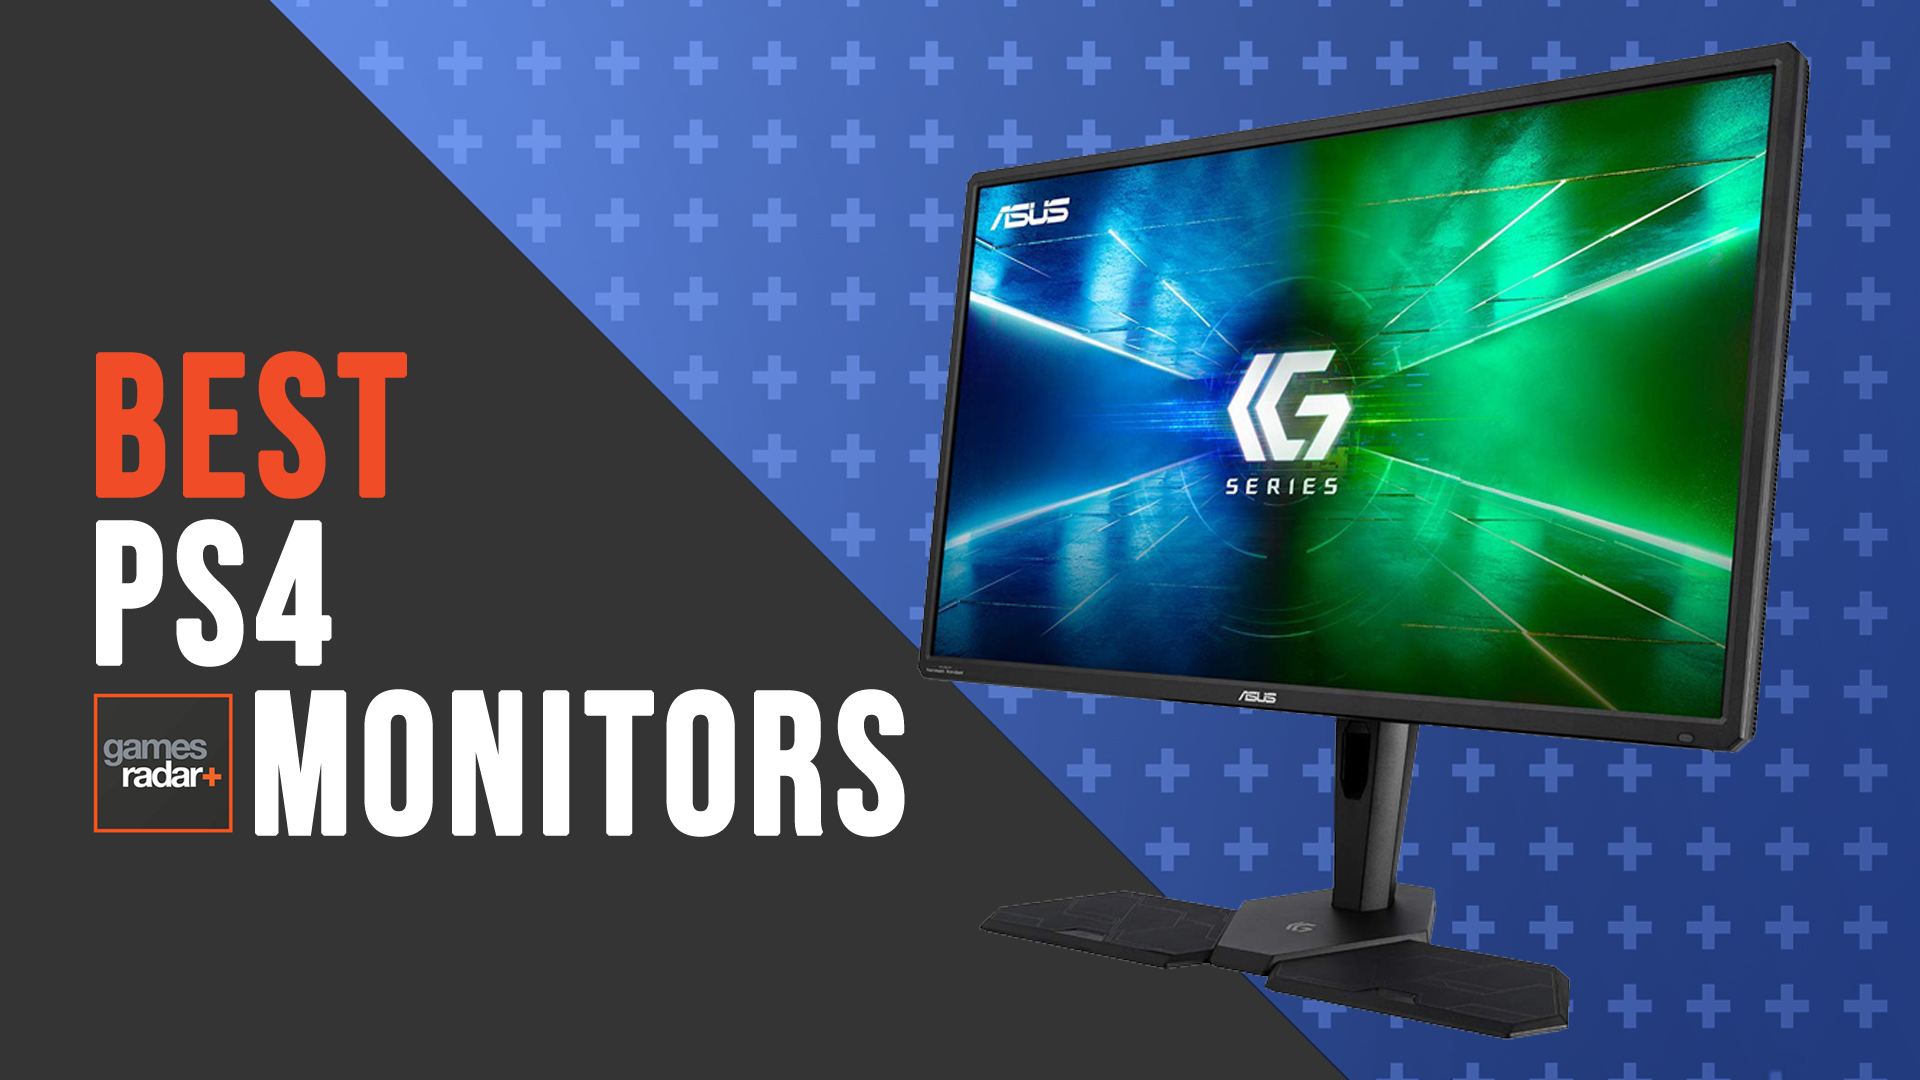 The Best Ps4 Monitors For 2021 Give Your Ps4 A Worthy Display Companion Gamesradar